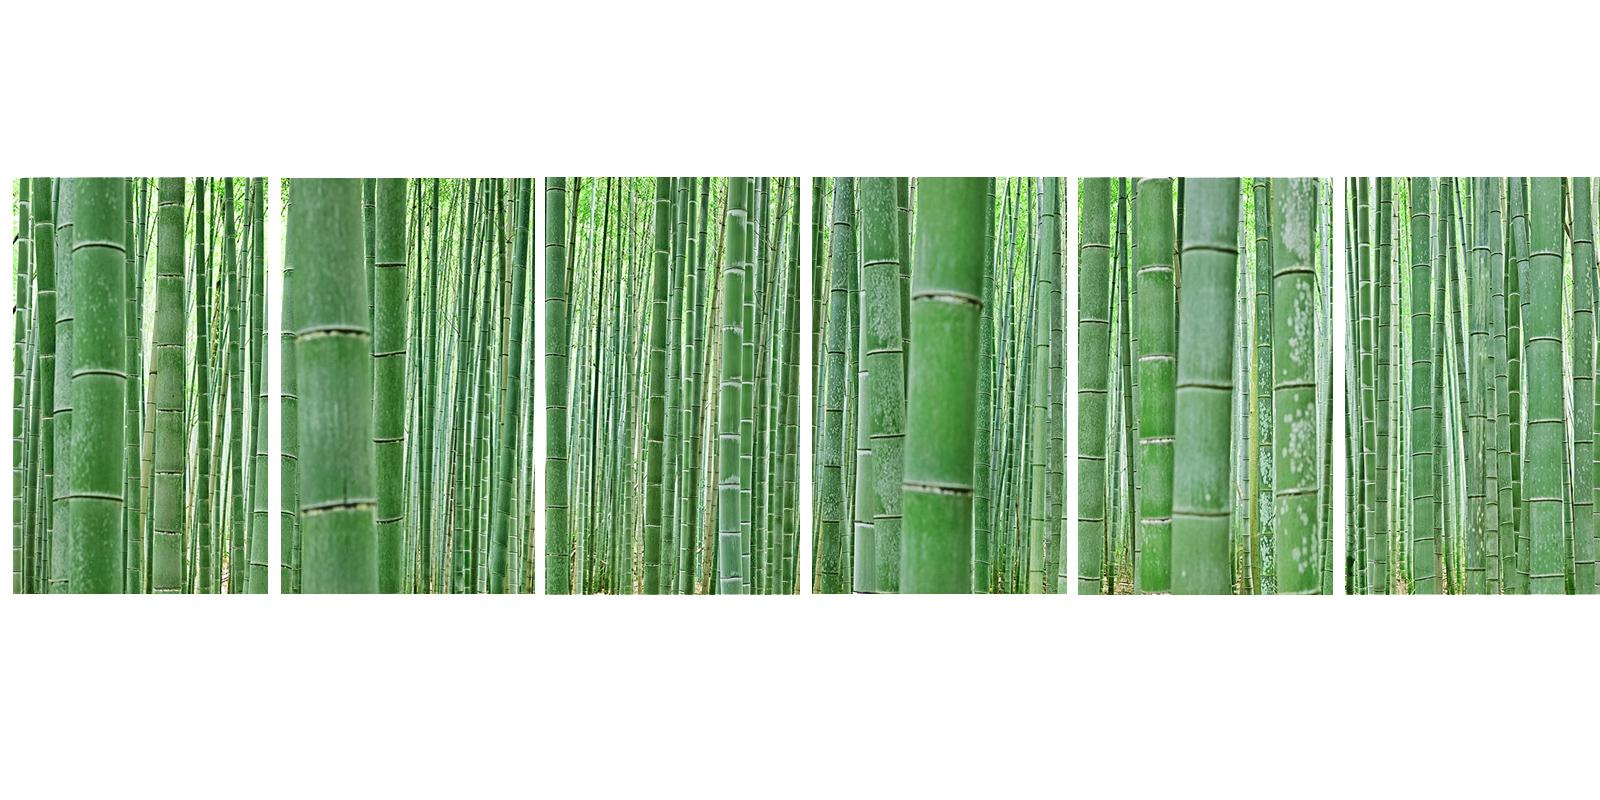 Bamboo Forest (6 frames) - abstract nature observation of Japanese grove